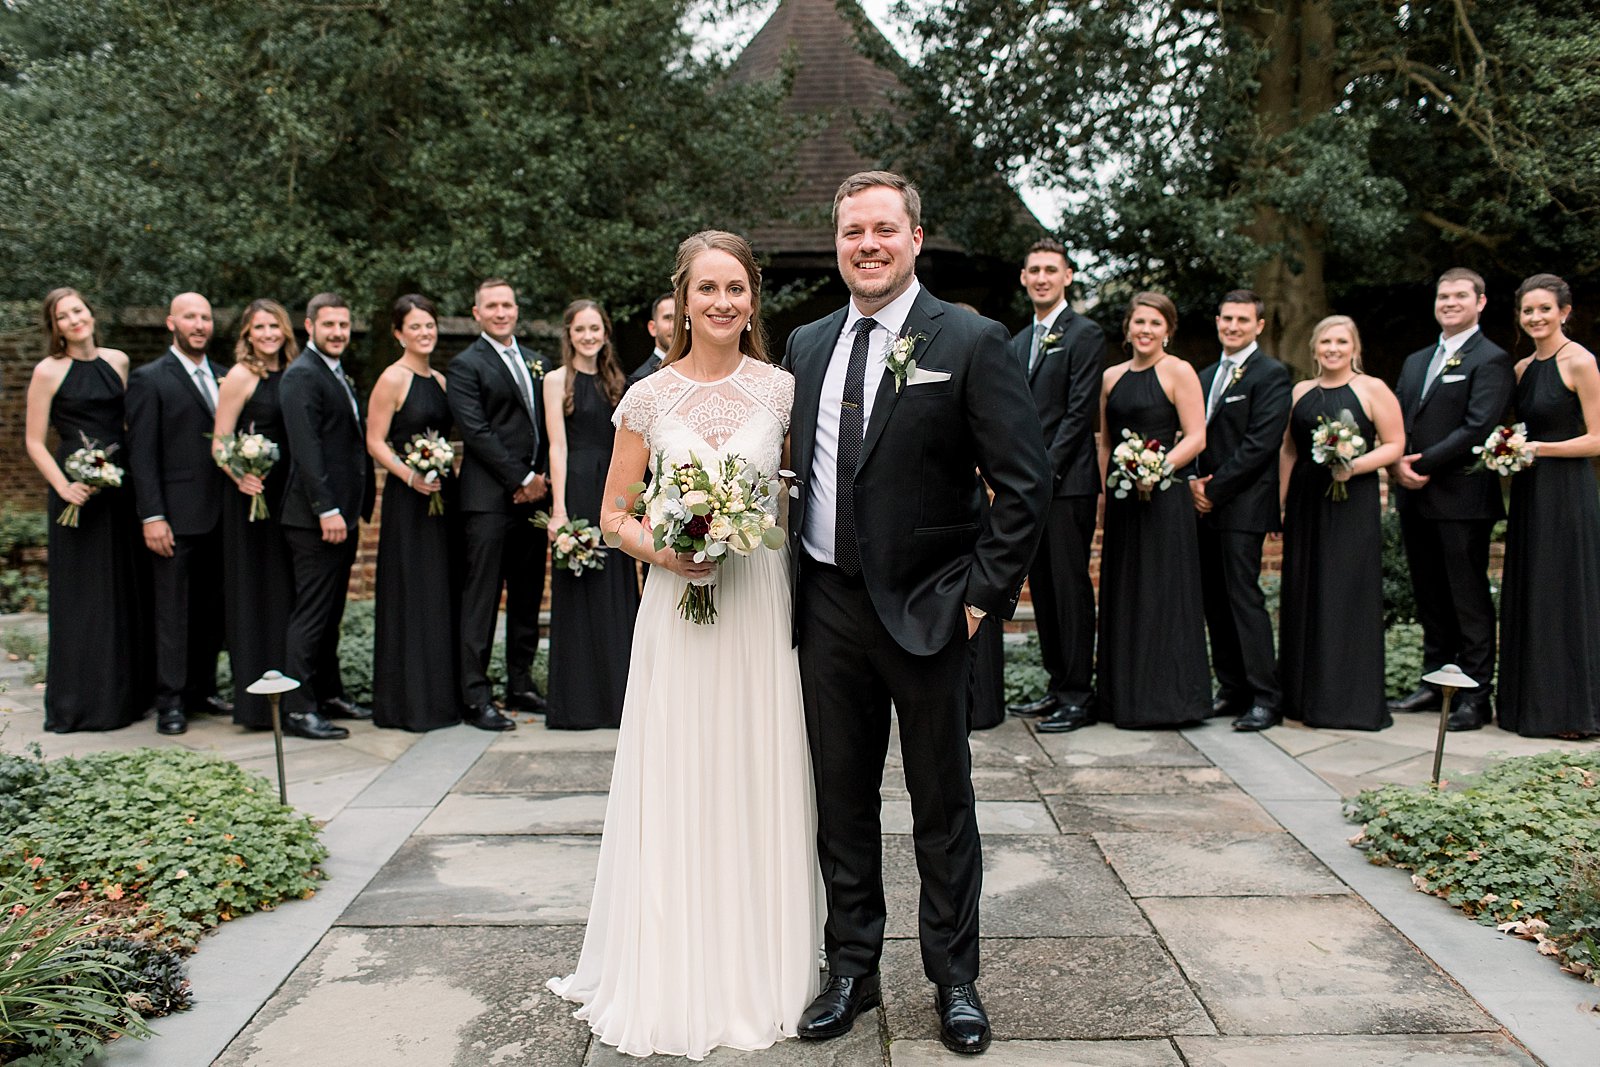 bride and groom stand in front of wedding party in black attire 